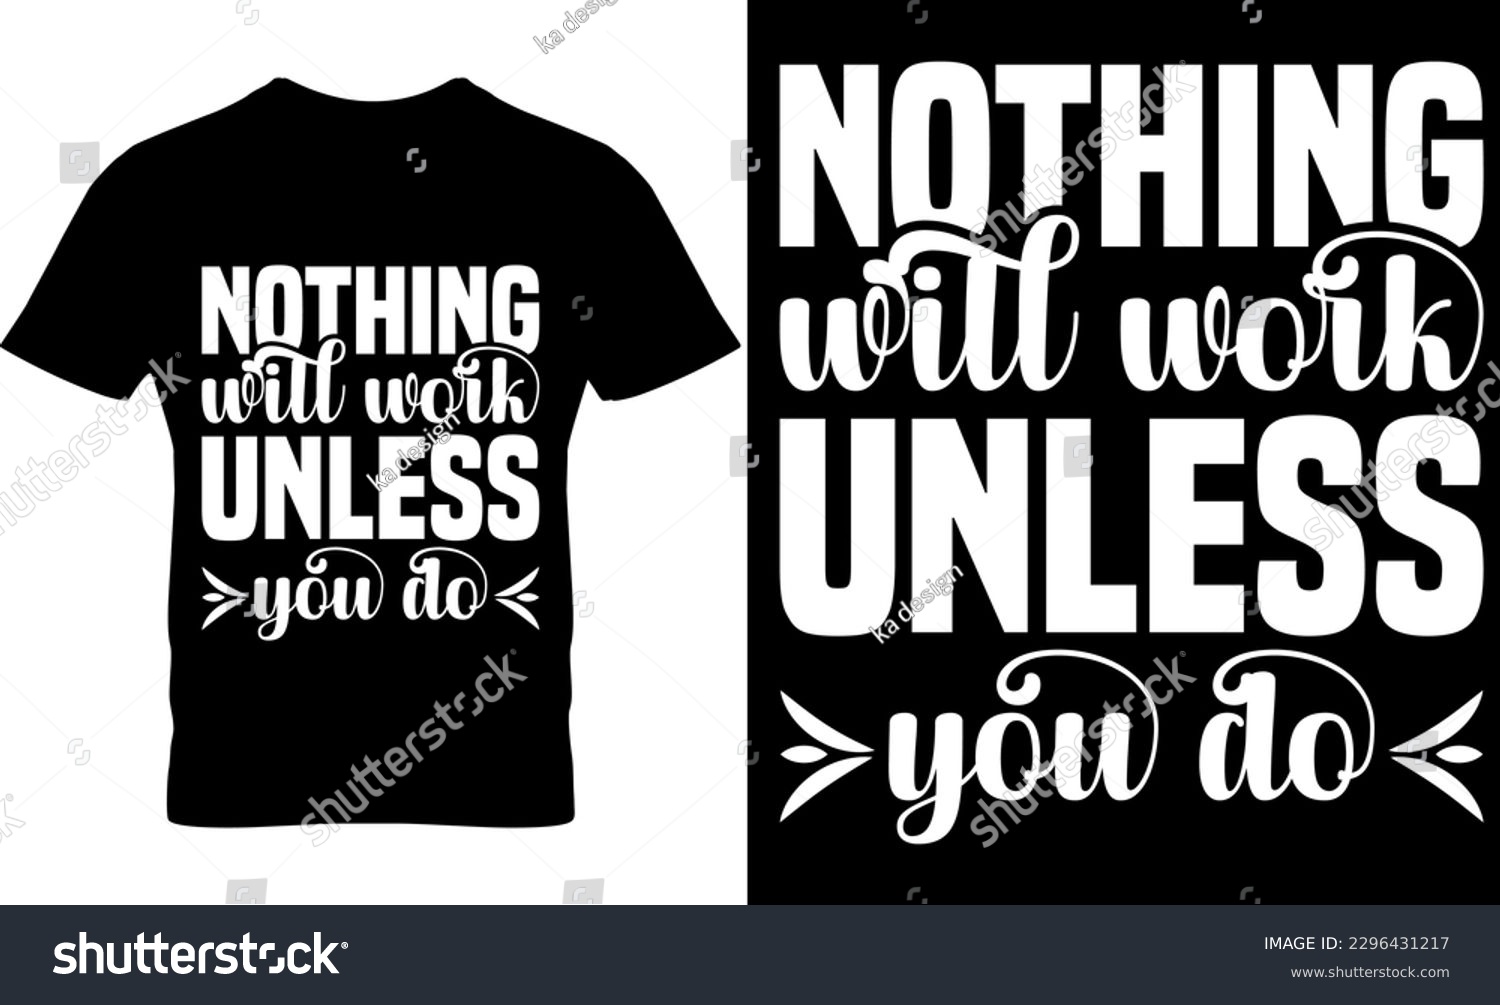 SVG of nothing will work unless you do. Graphic, illustration, typography, motivational, inspiration, inspiration t-shirt design, Typography t-shirt design, motivational quotes, motivational t-shirt design, svg